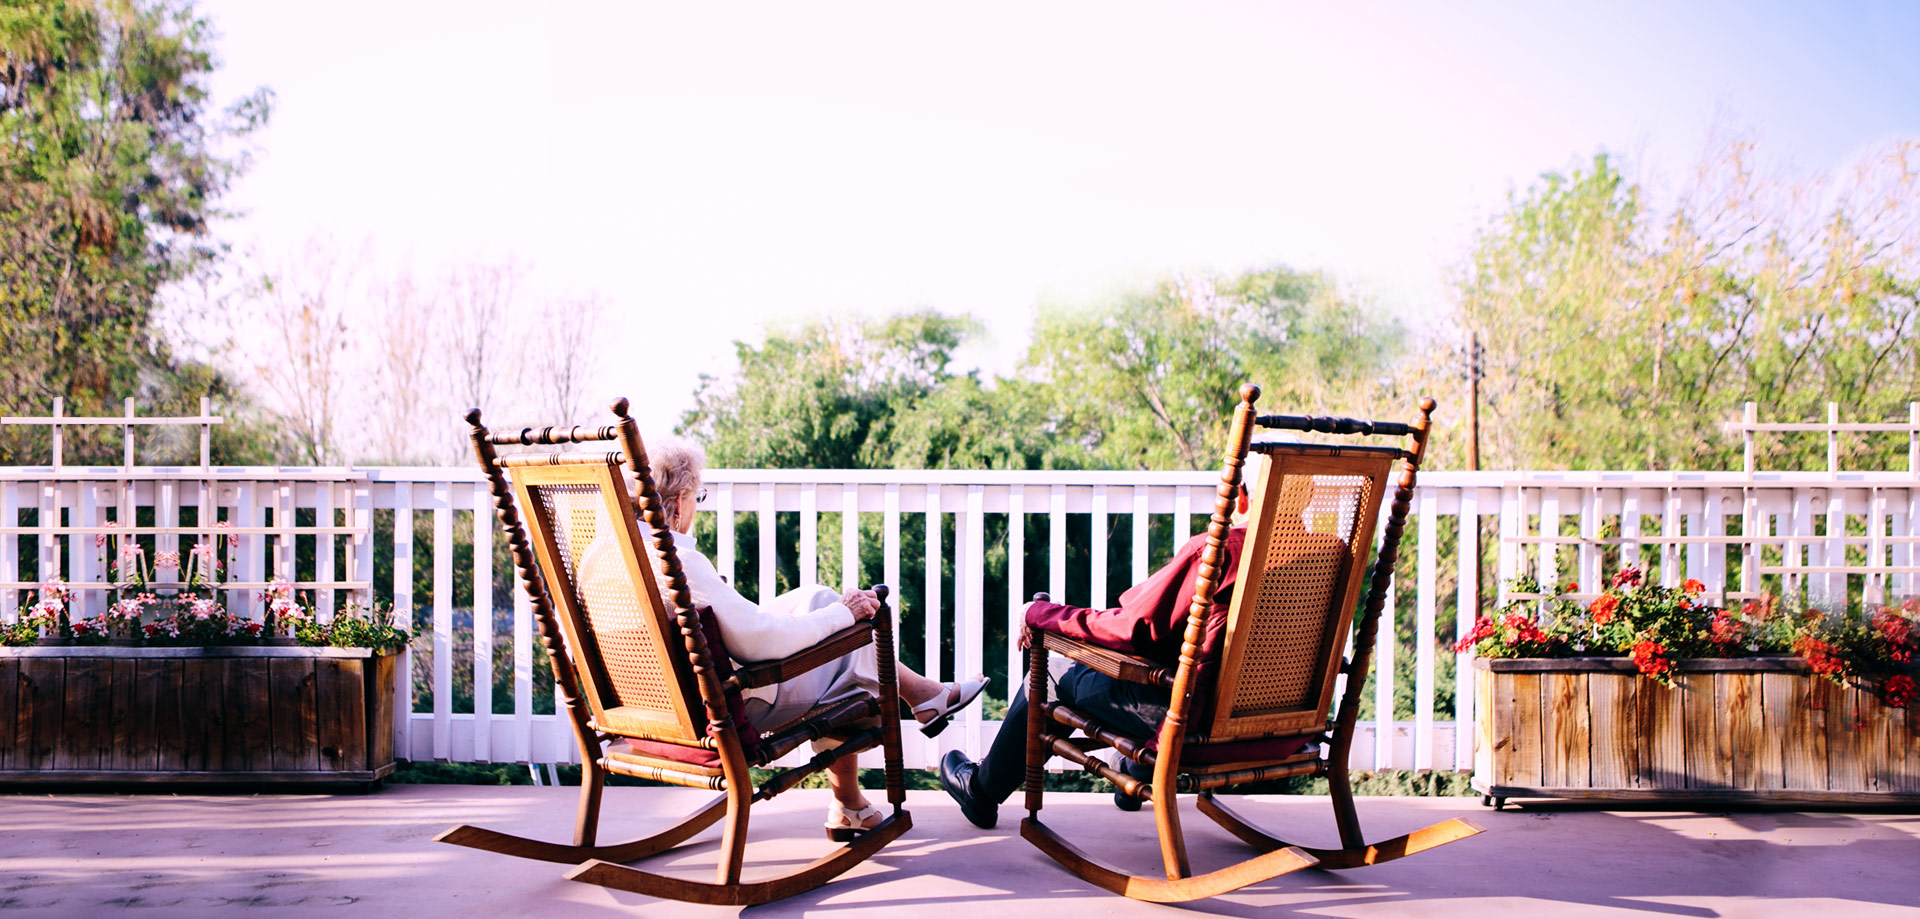 Couple in rocking chair